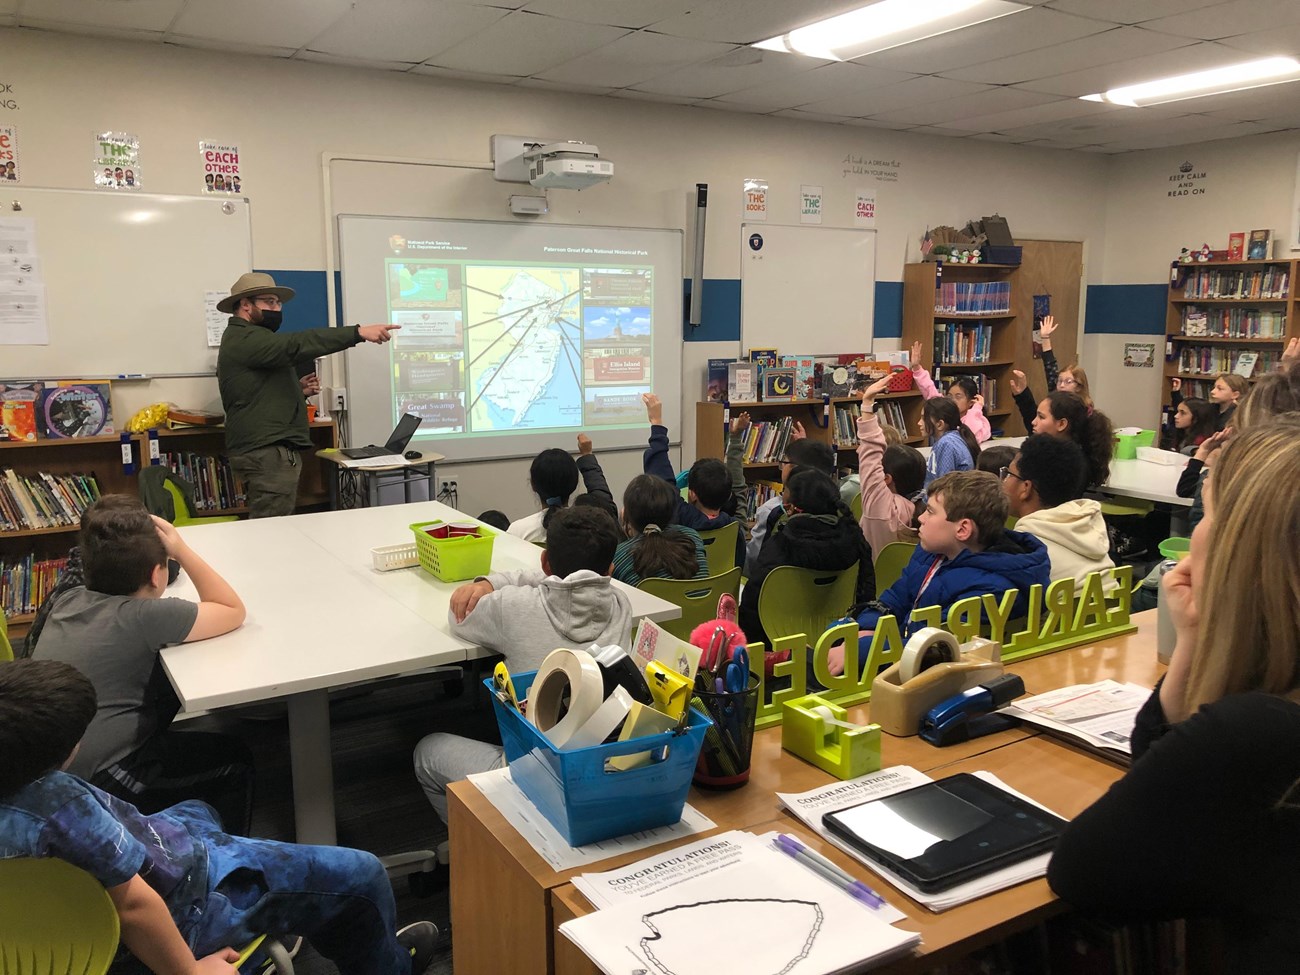 Park ranger pointing as 4th-grade students raise hands in a classroom, a powerpoint on a screen